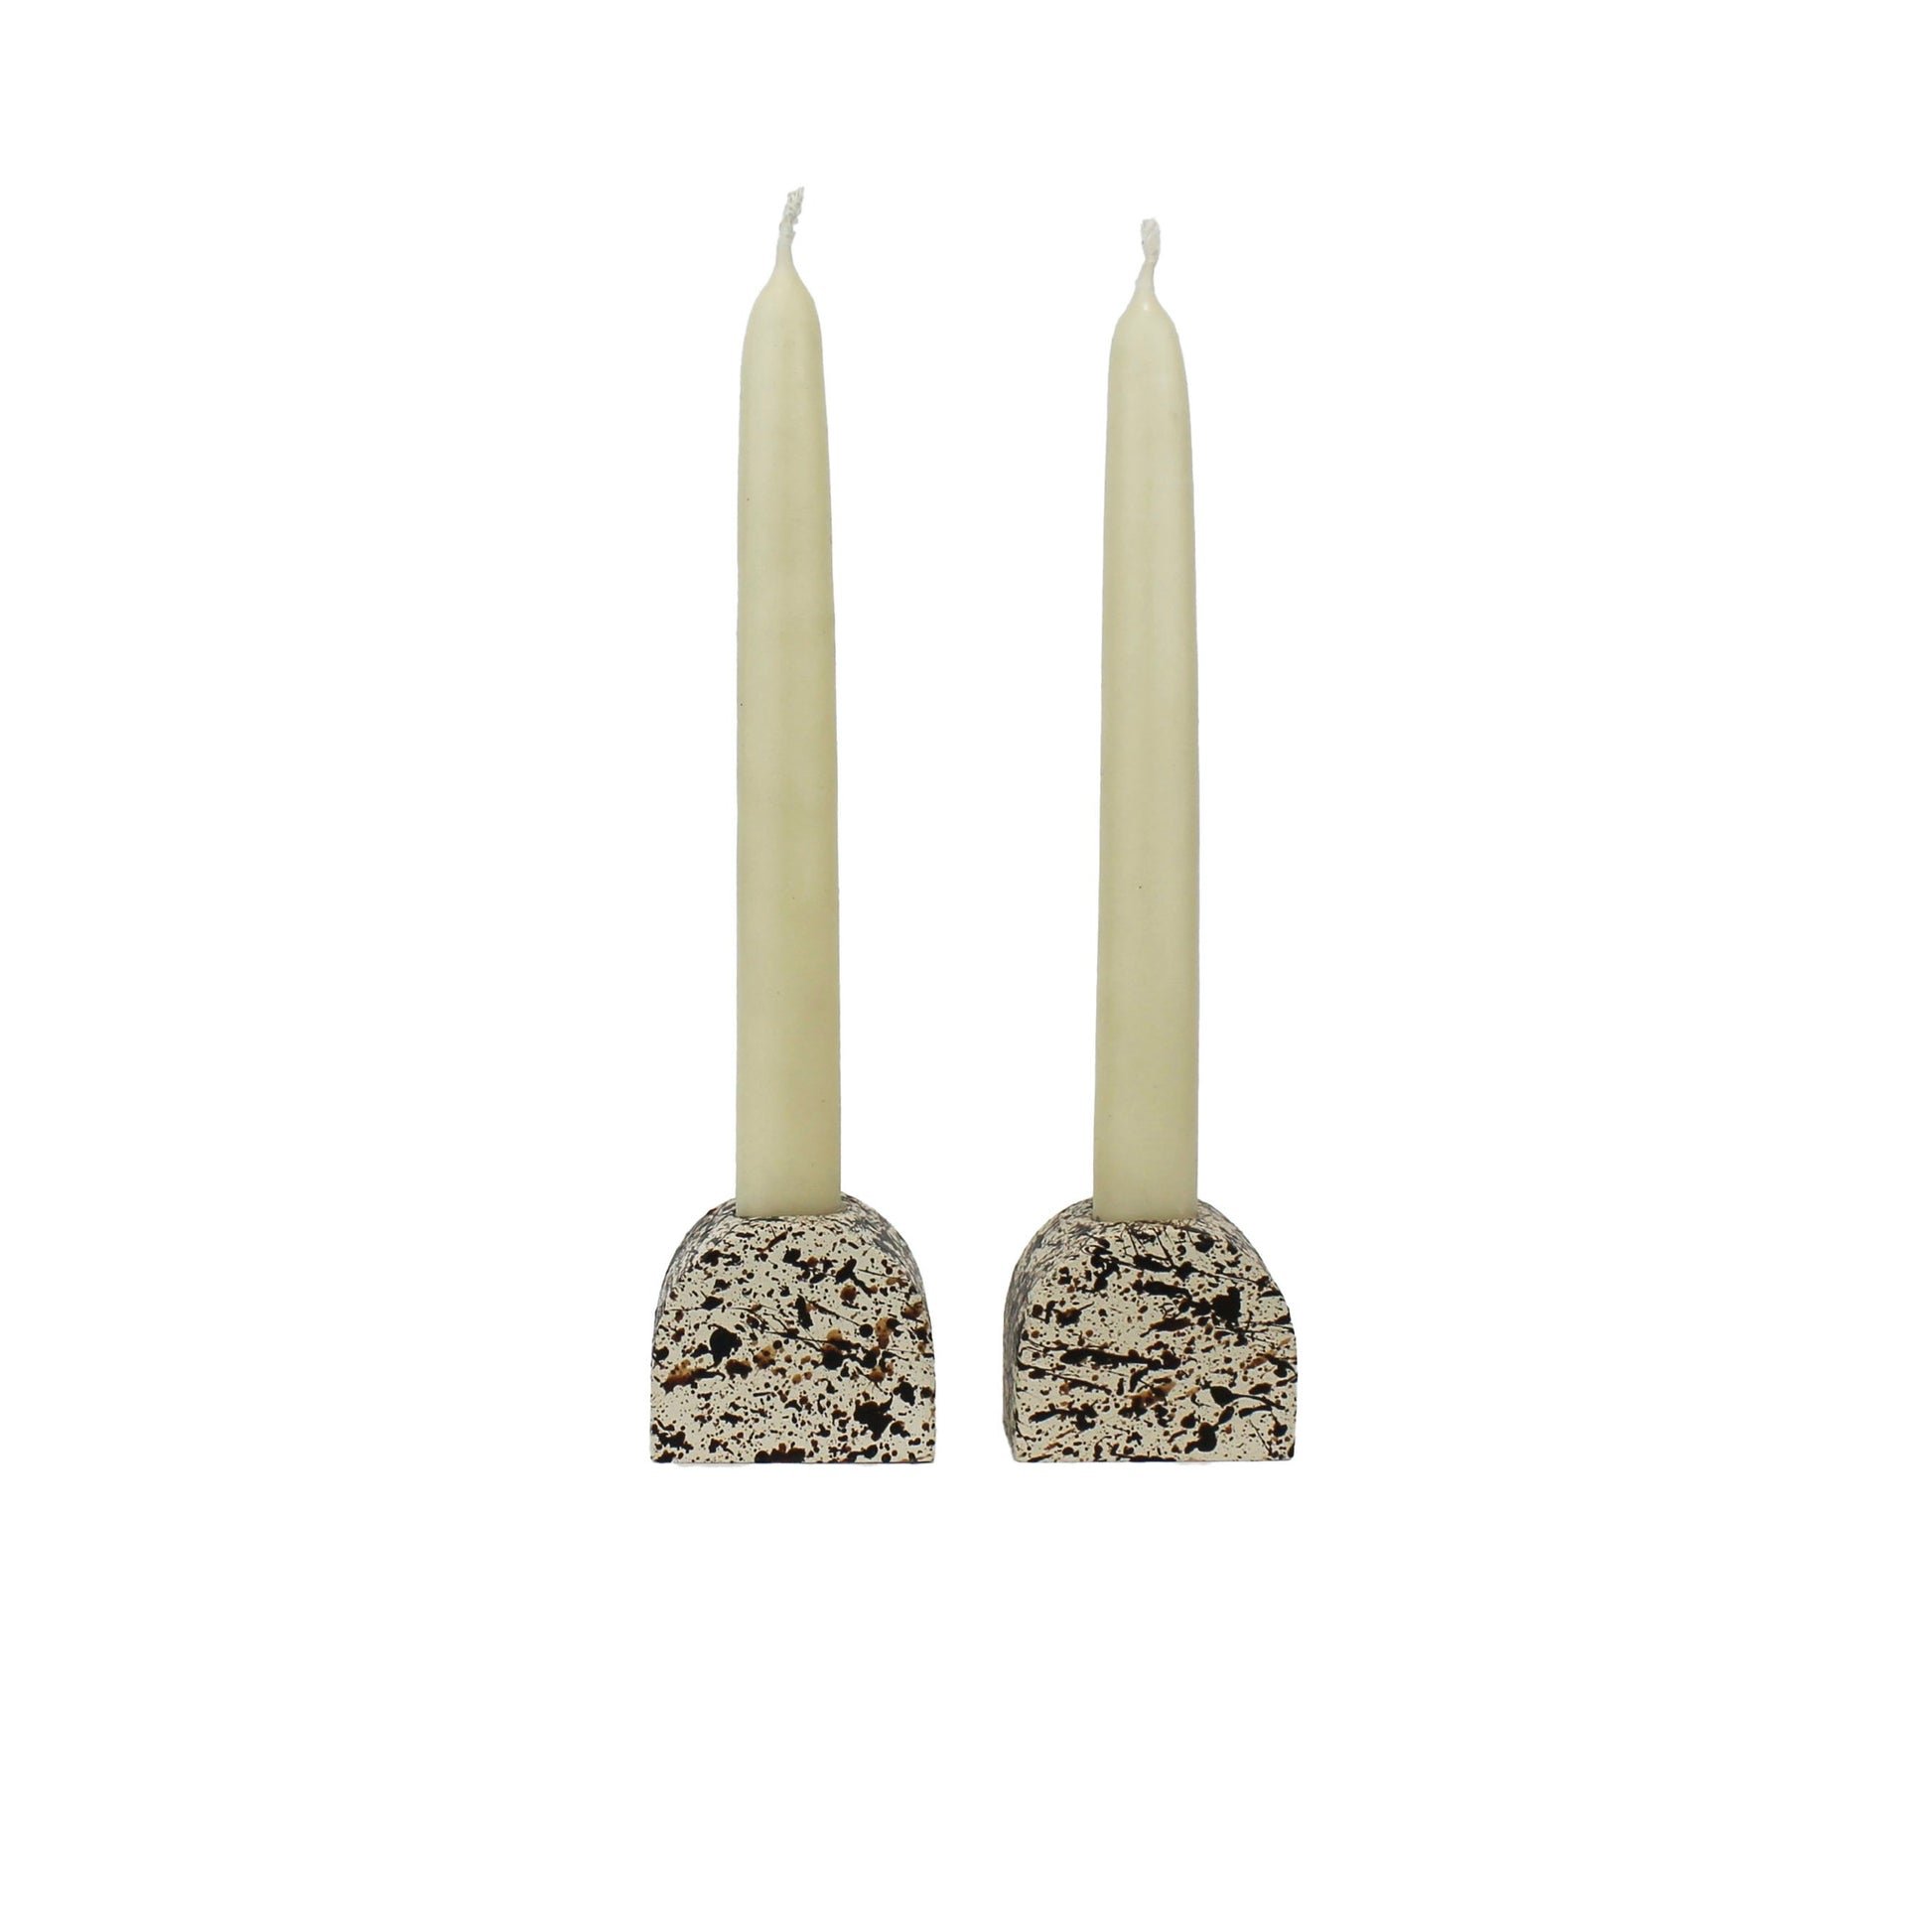 Brown and Cream Splattered Pattern Small Arch Shaped Concrete Candle Holder